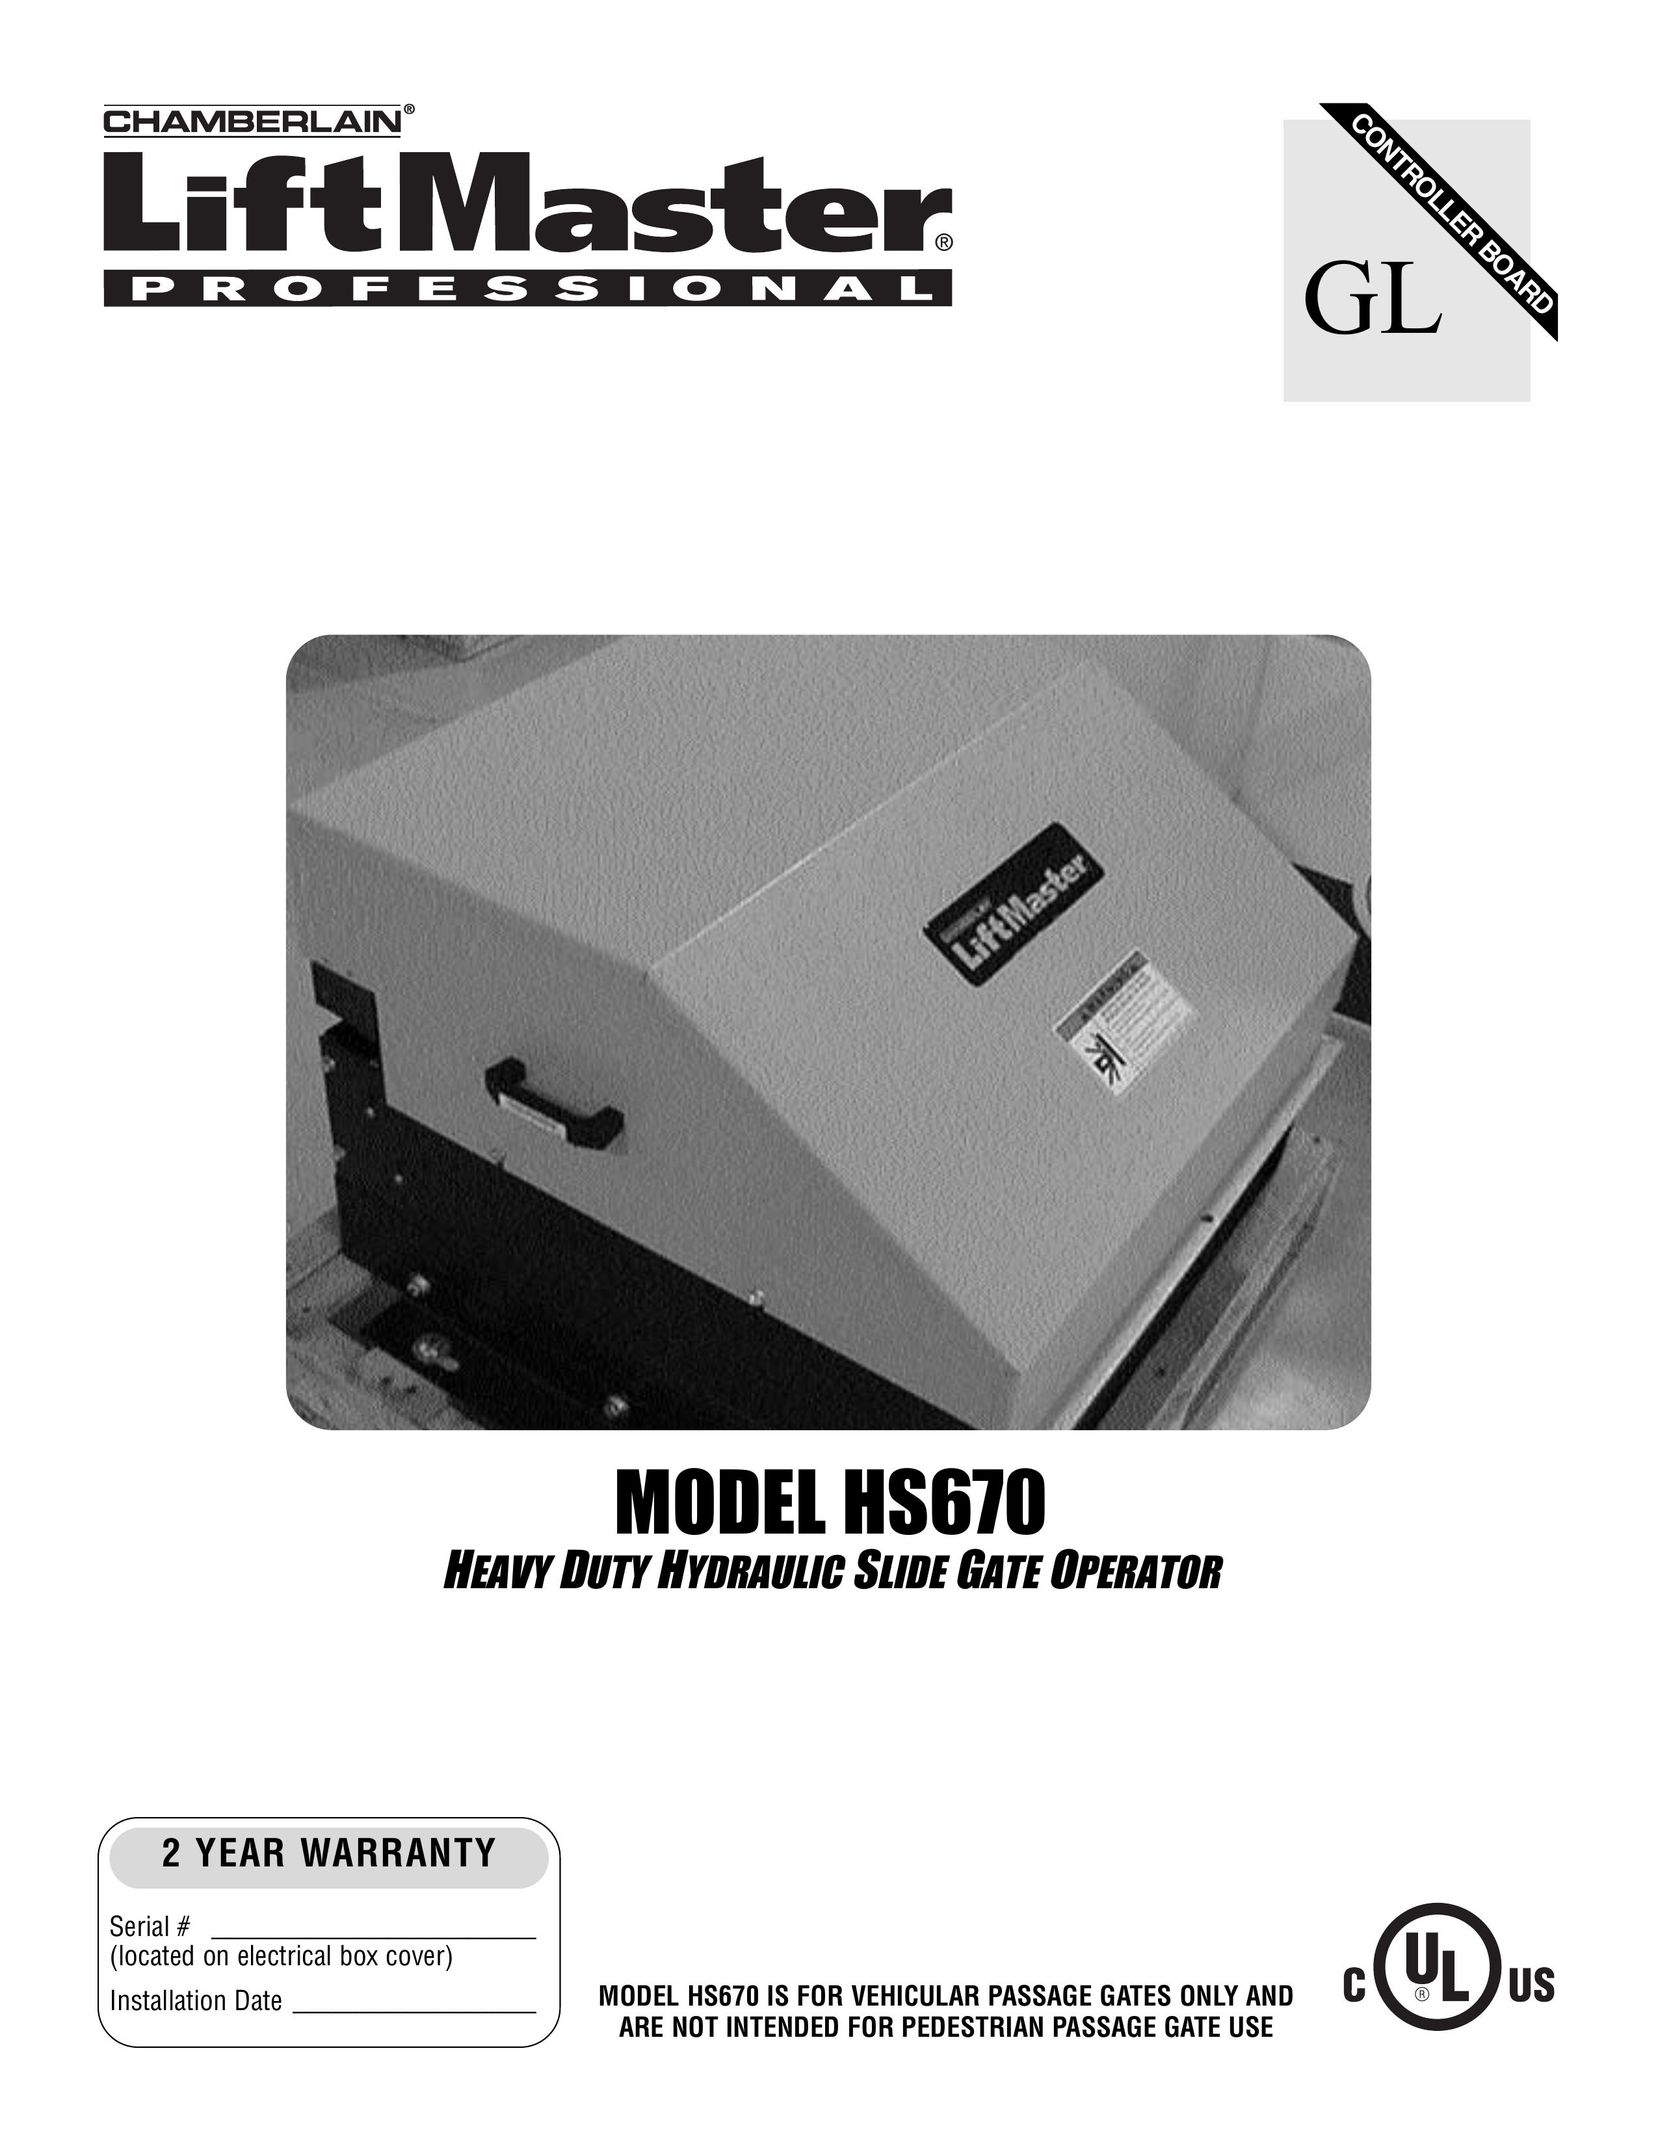 Chamberlain HS670 Safety Gate User Manual (Page 1)